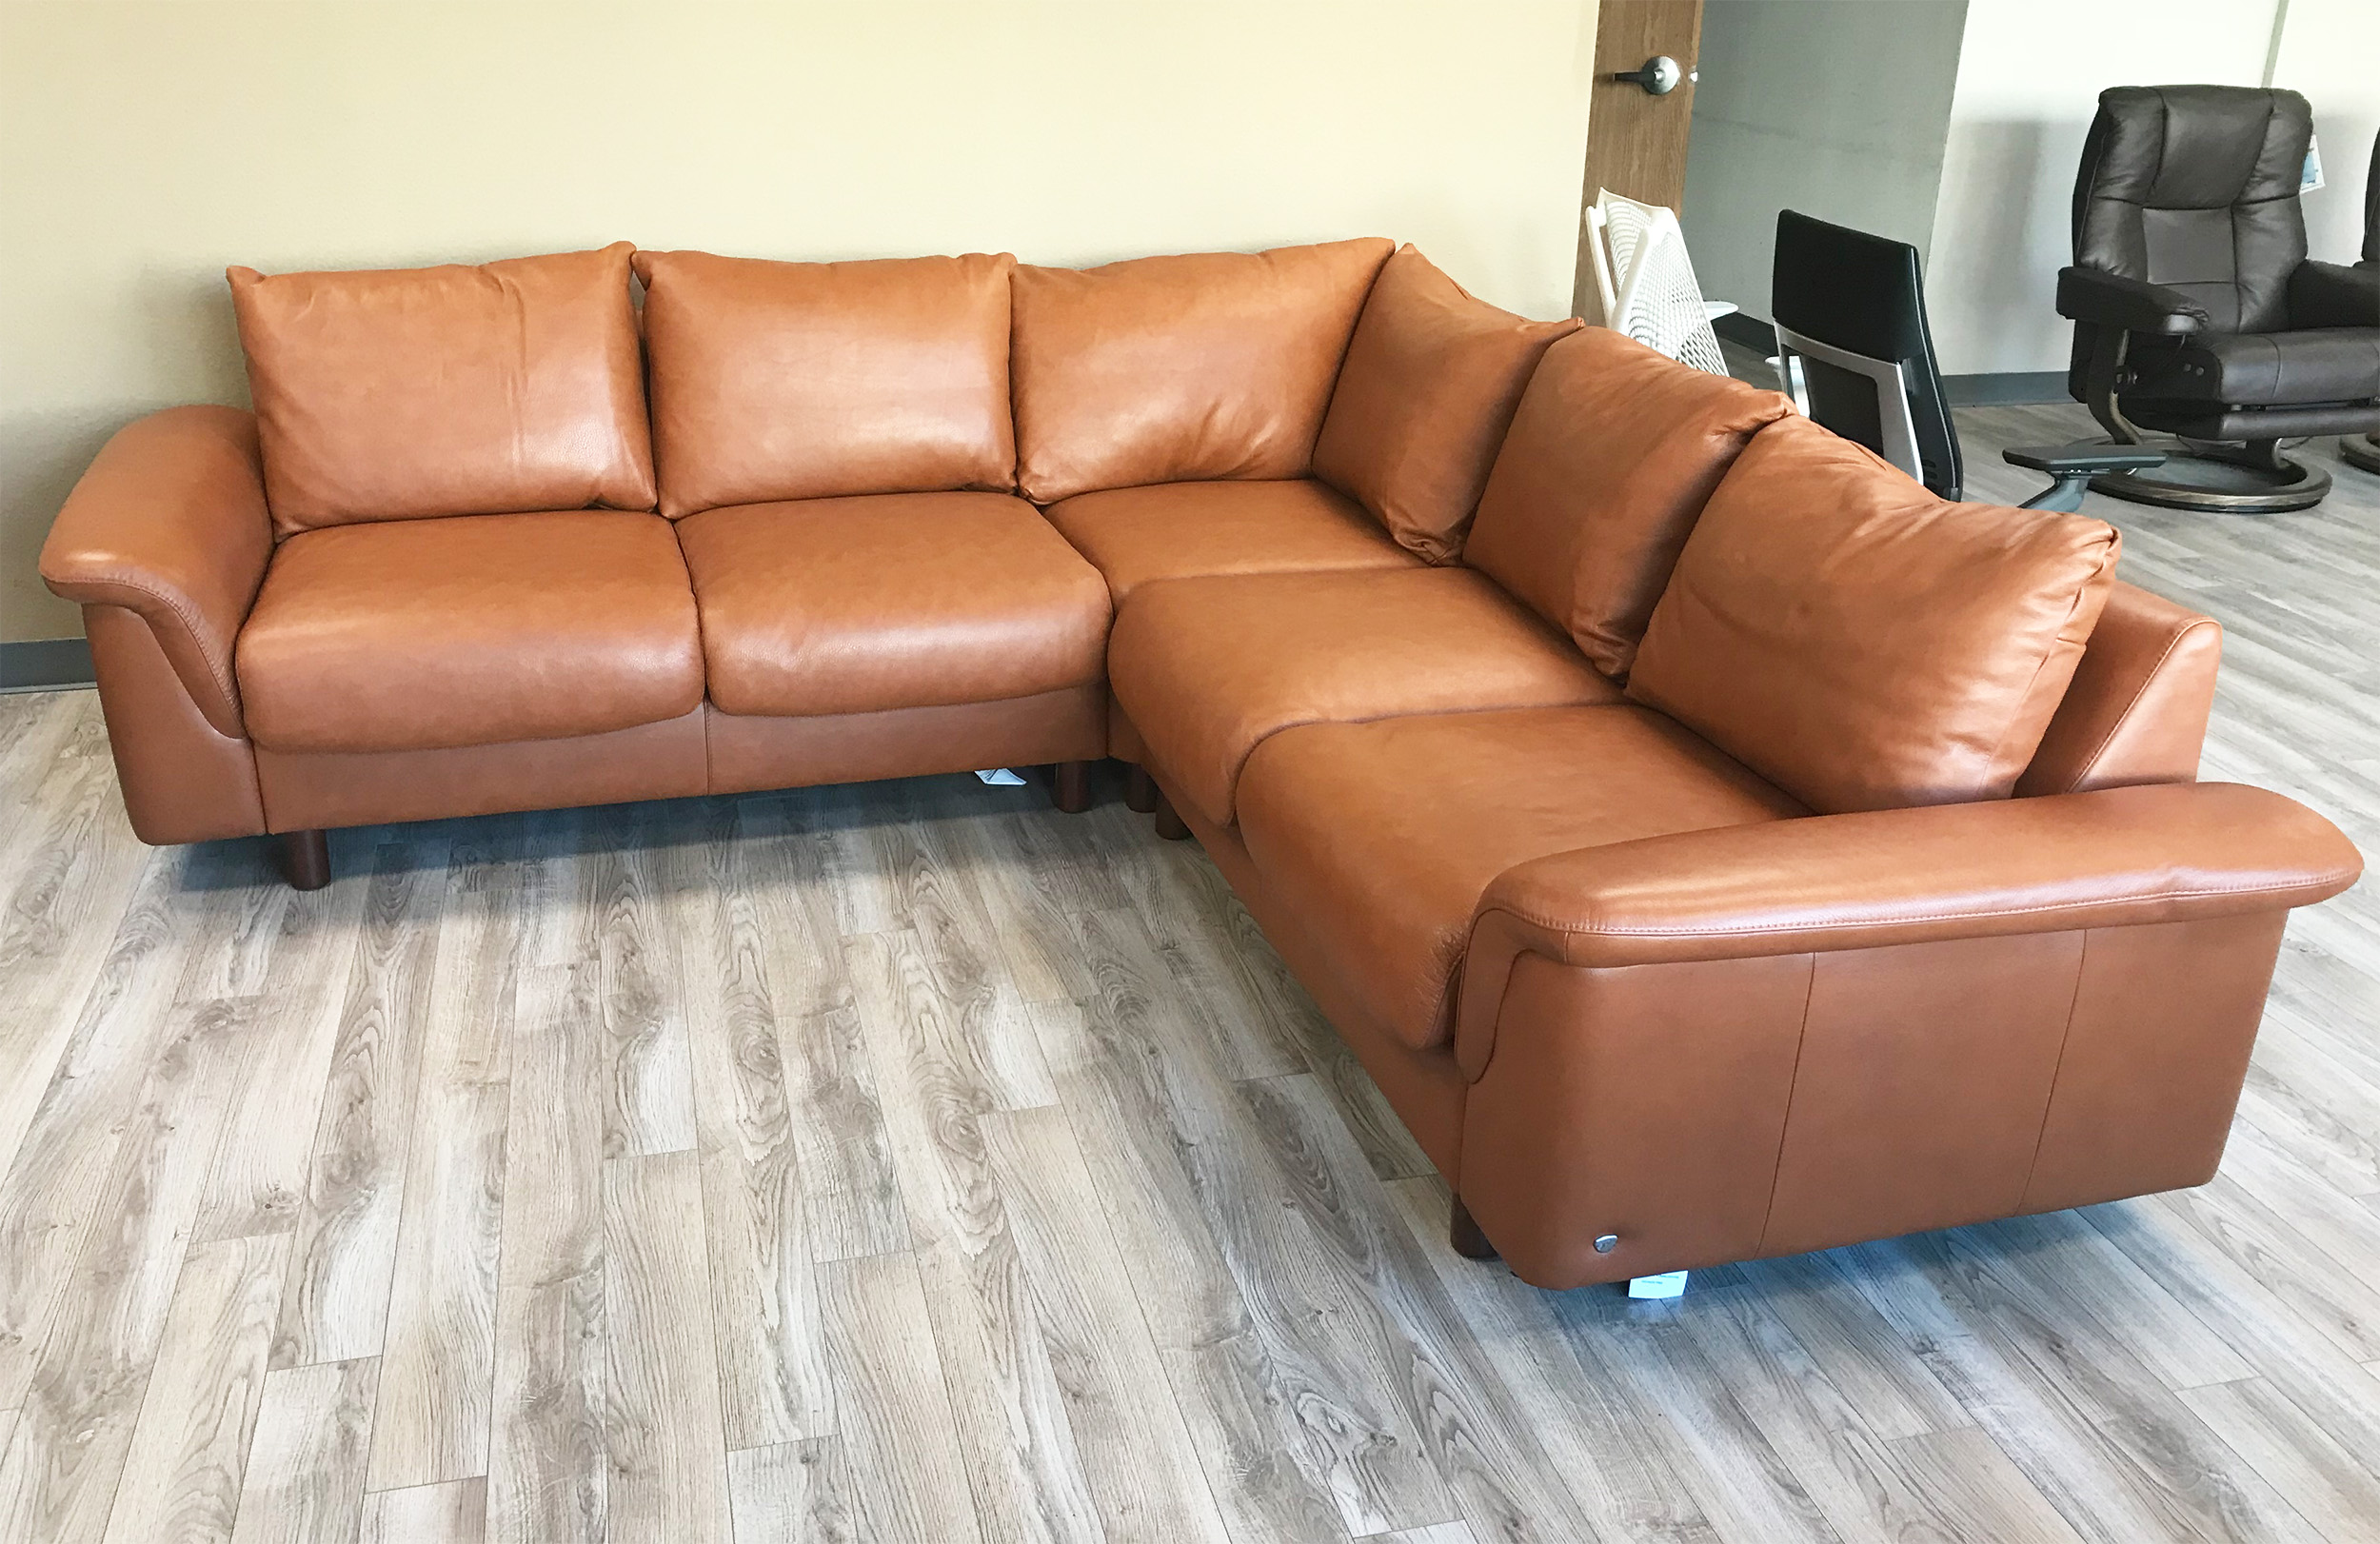 Anden klasse guiden fatning Stressless E300 6 Seat Sectional Sofa with LongSeat in Royalin TigerEye  Leather by Ekornes - Stressless E300 3 Seat Sofa